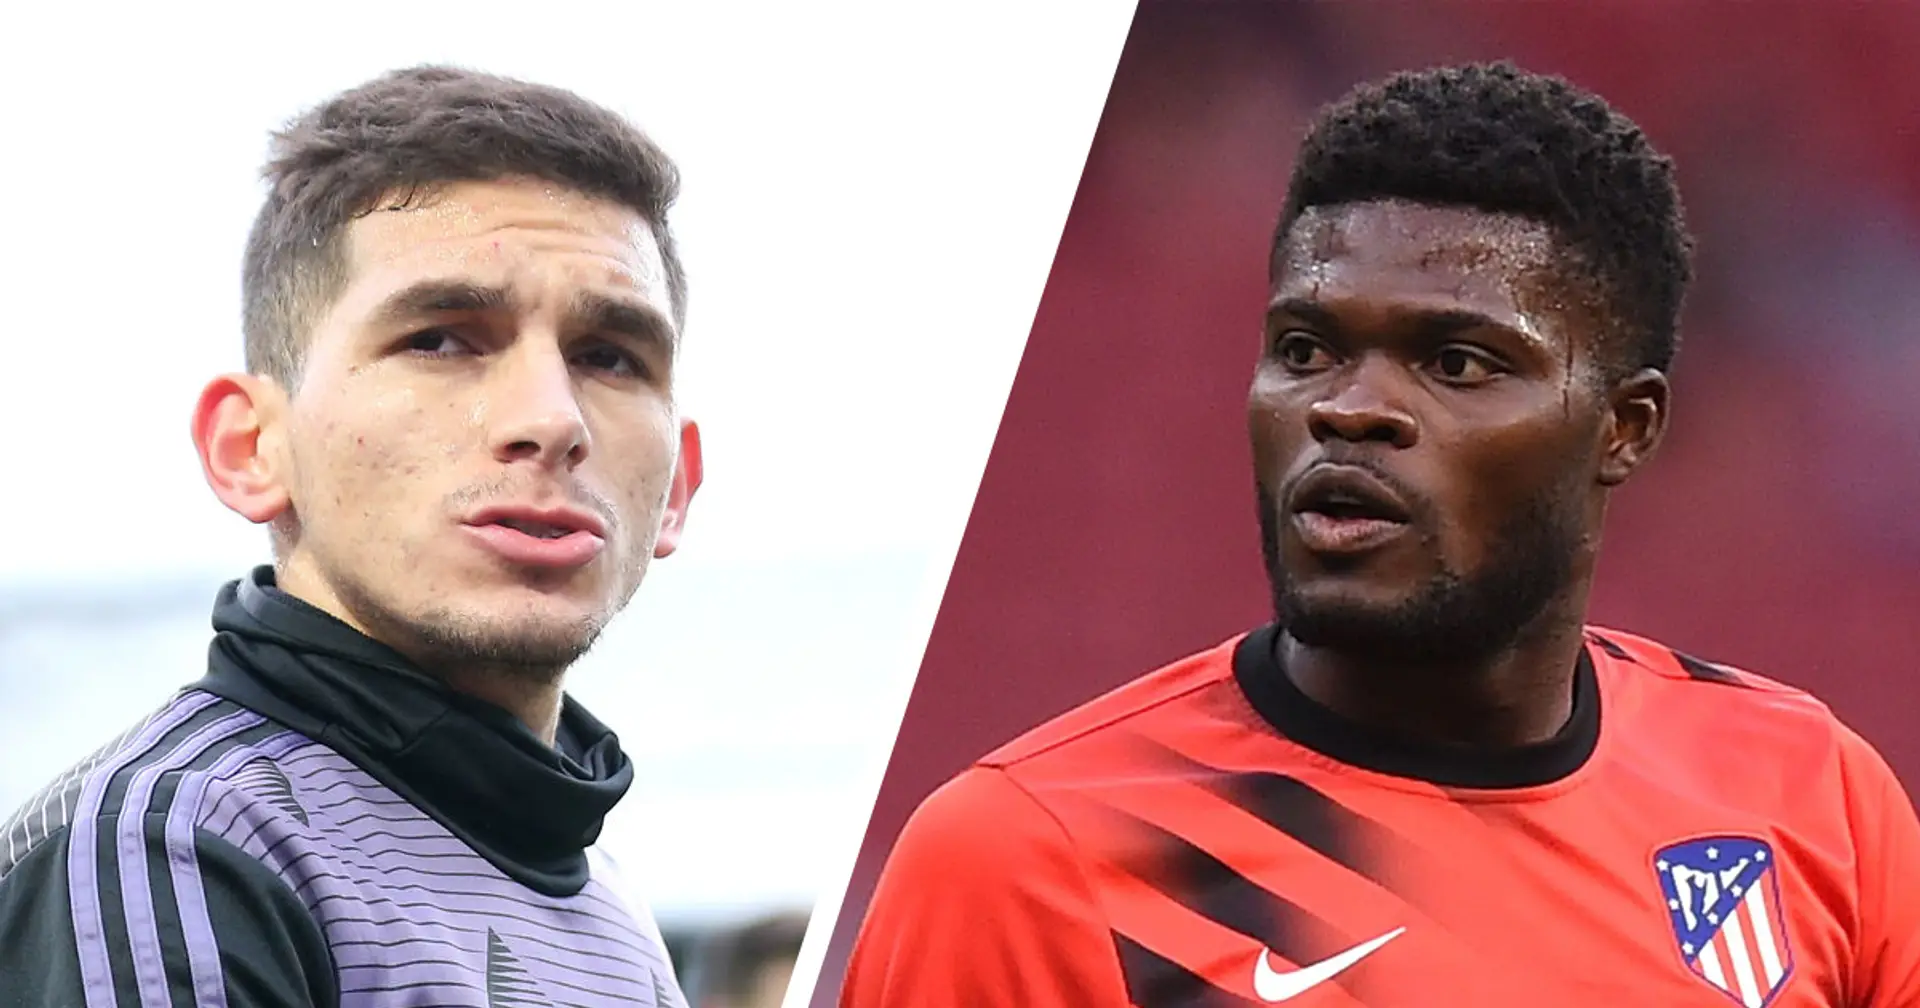 Arsenal and Atletico in talks over loan move for Torreira, Partey not discussed (reliability: 4 stars)